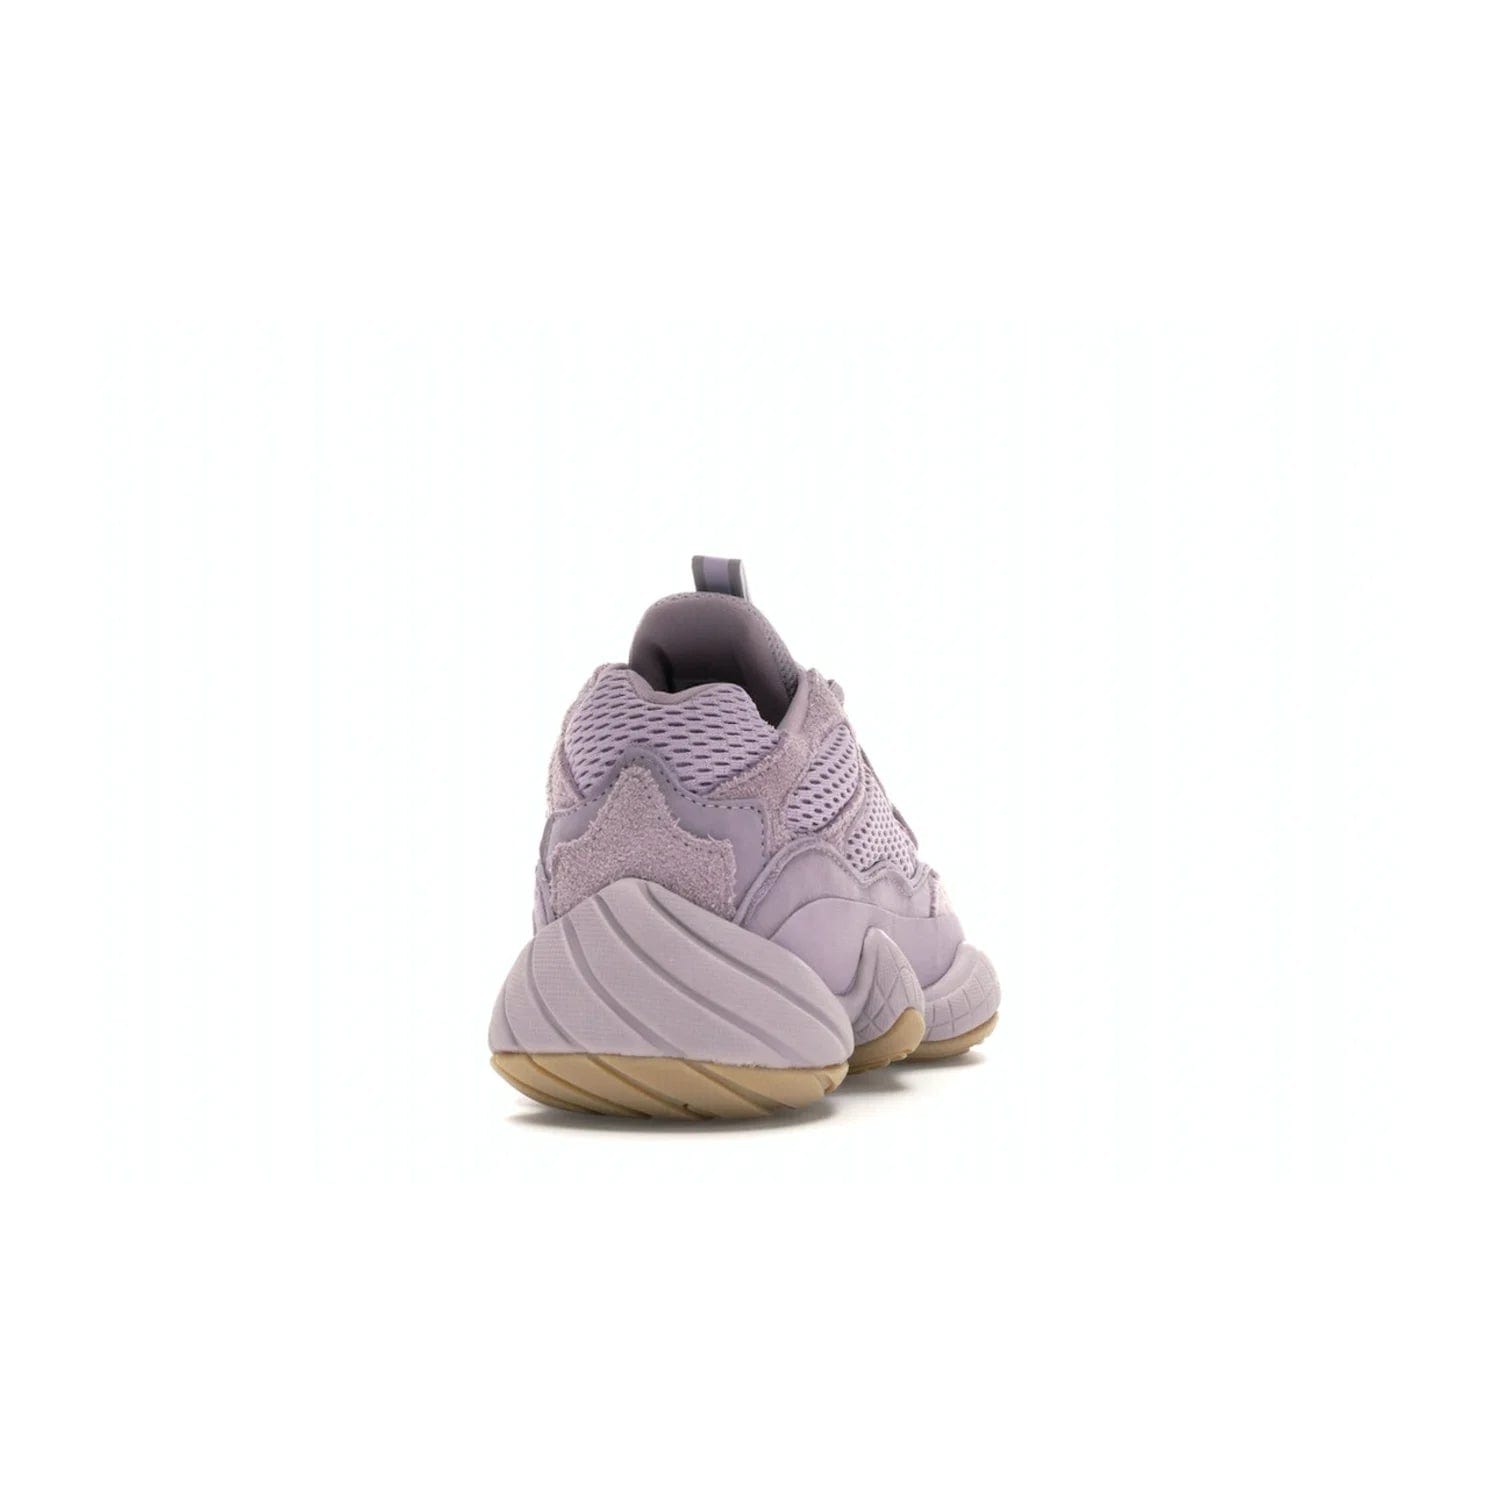 adidas Yeezy 500 Soft Vision - Image 29 - Only at www.BallersClubKickz.com - New adidas Yeezy 500 Soft Vision sneaker featuring a combination of mesh, leather, and suede in a classic Soft Vision colorway. Gum rubber outsole ensures durability and traction. An everyday sneaker that stands out from the crowd.